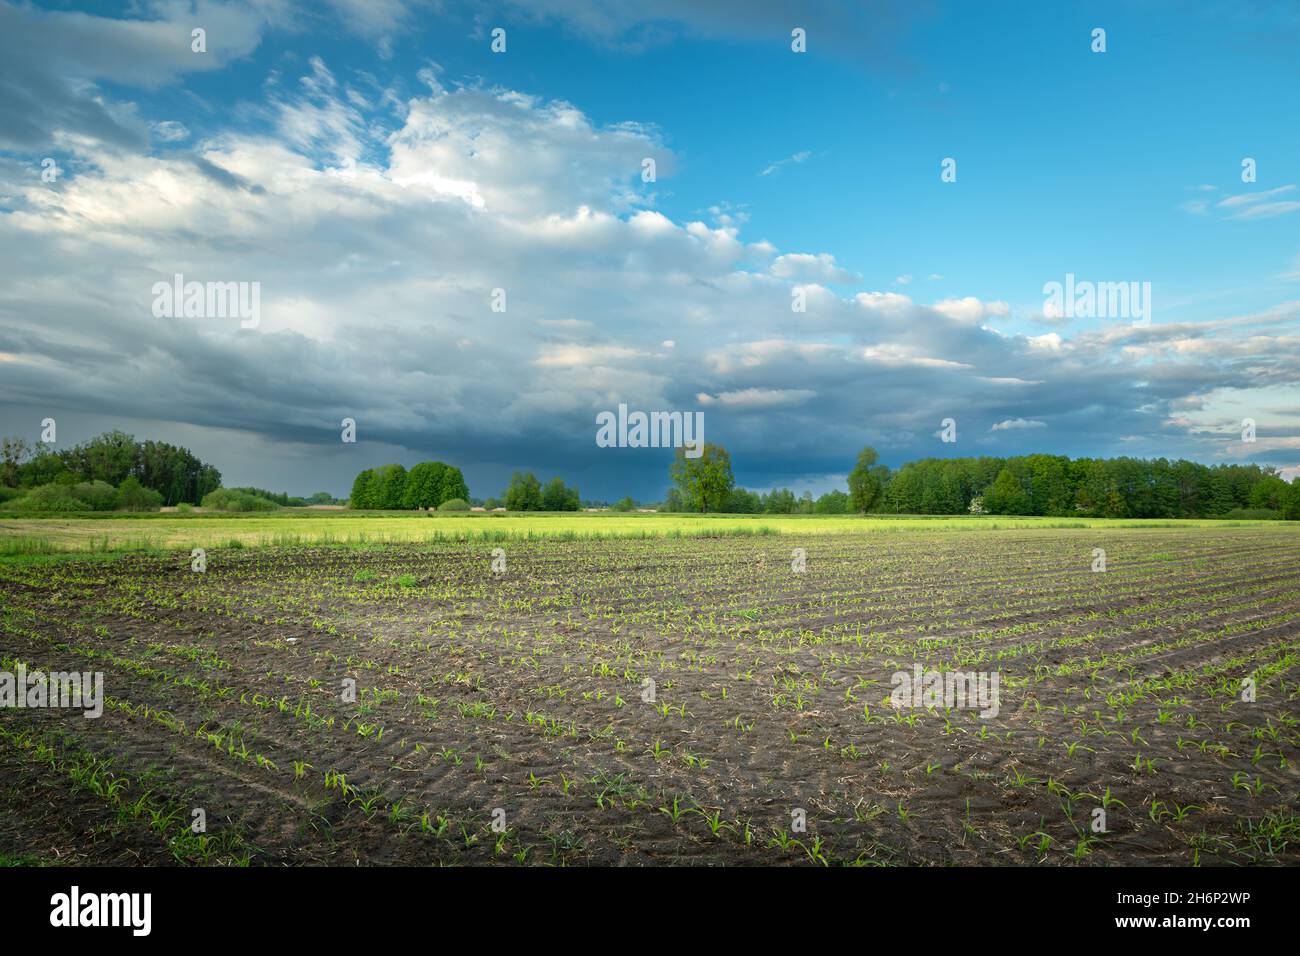 Plants planted in a field and a cloudy sky, Nowiny, Poland Stock Photo